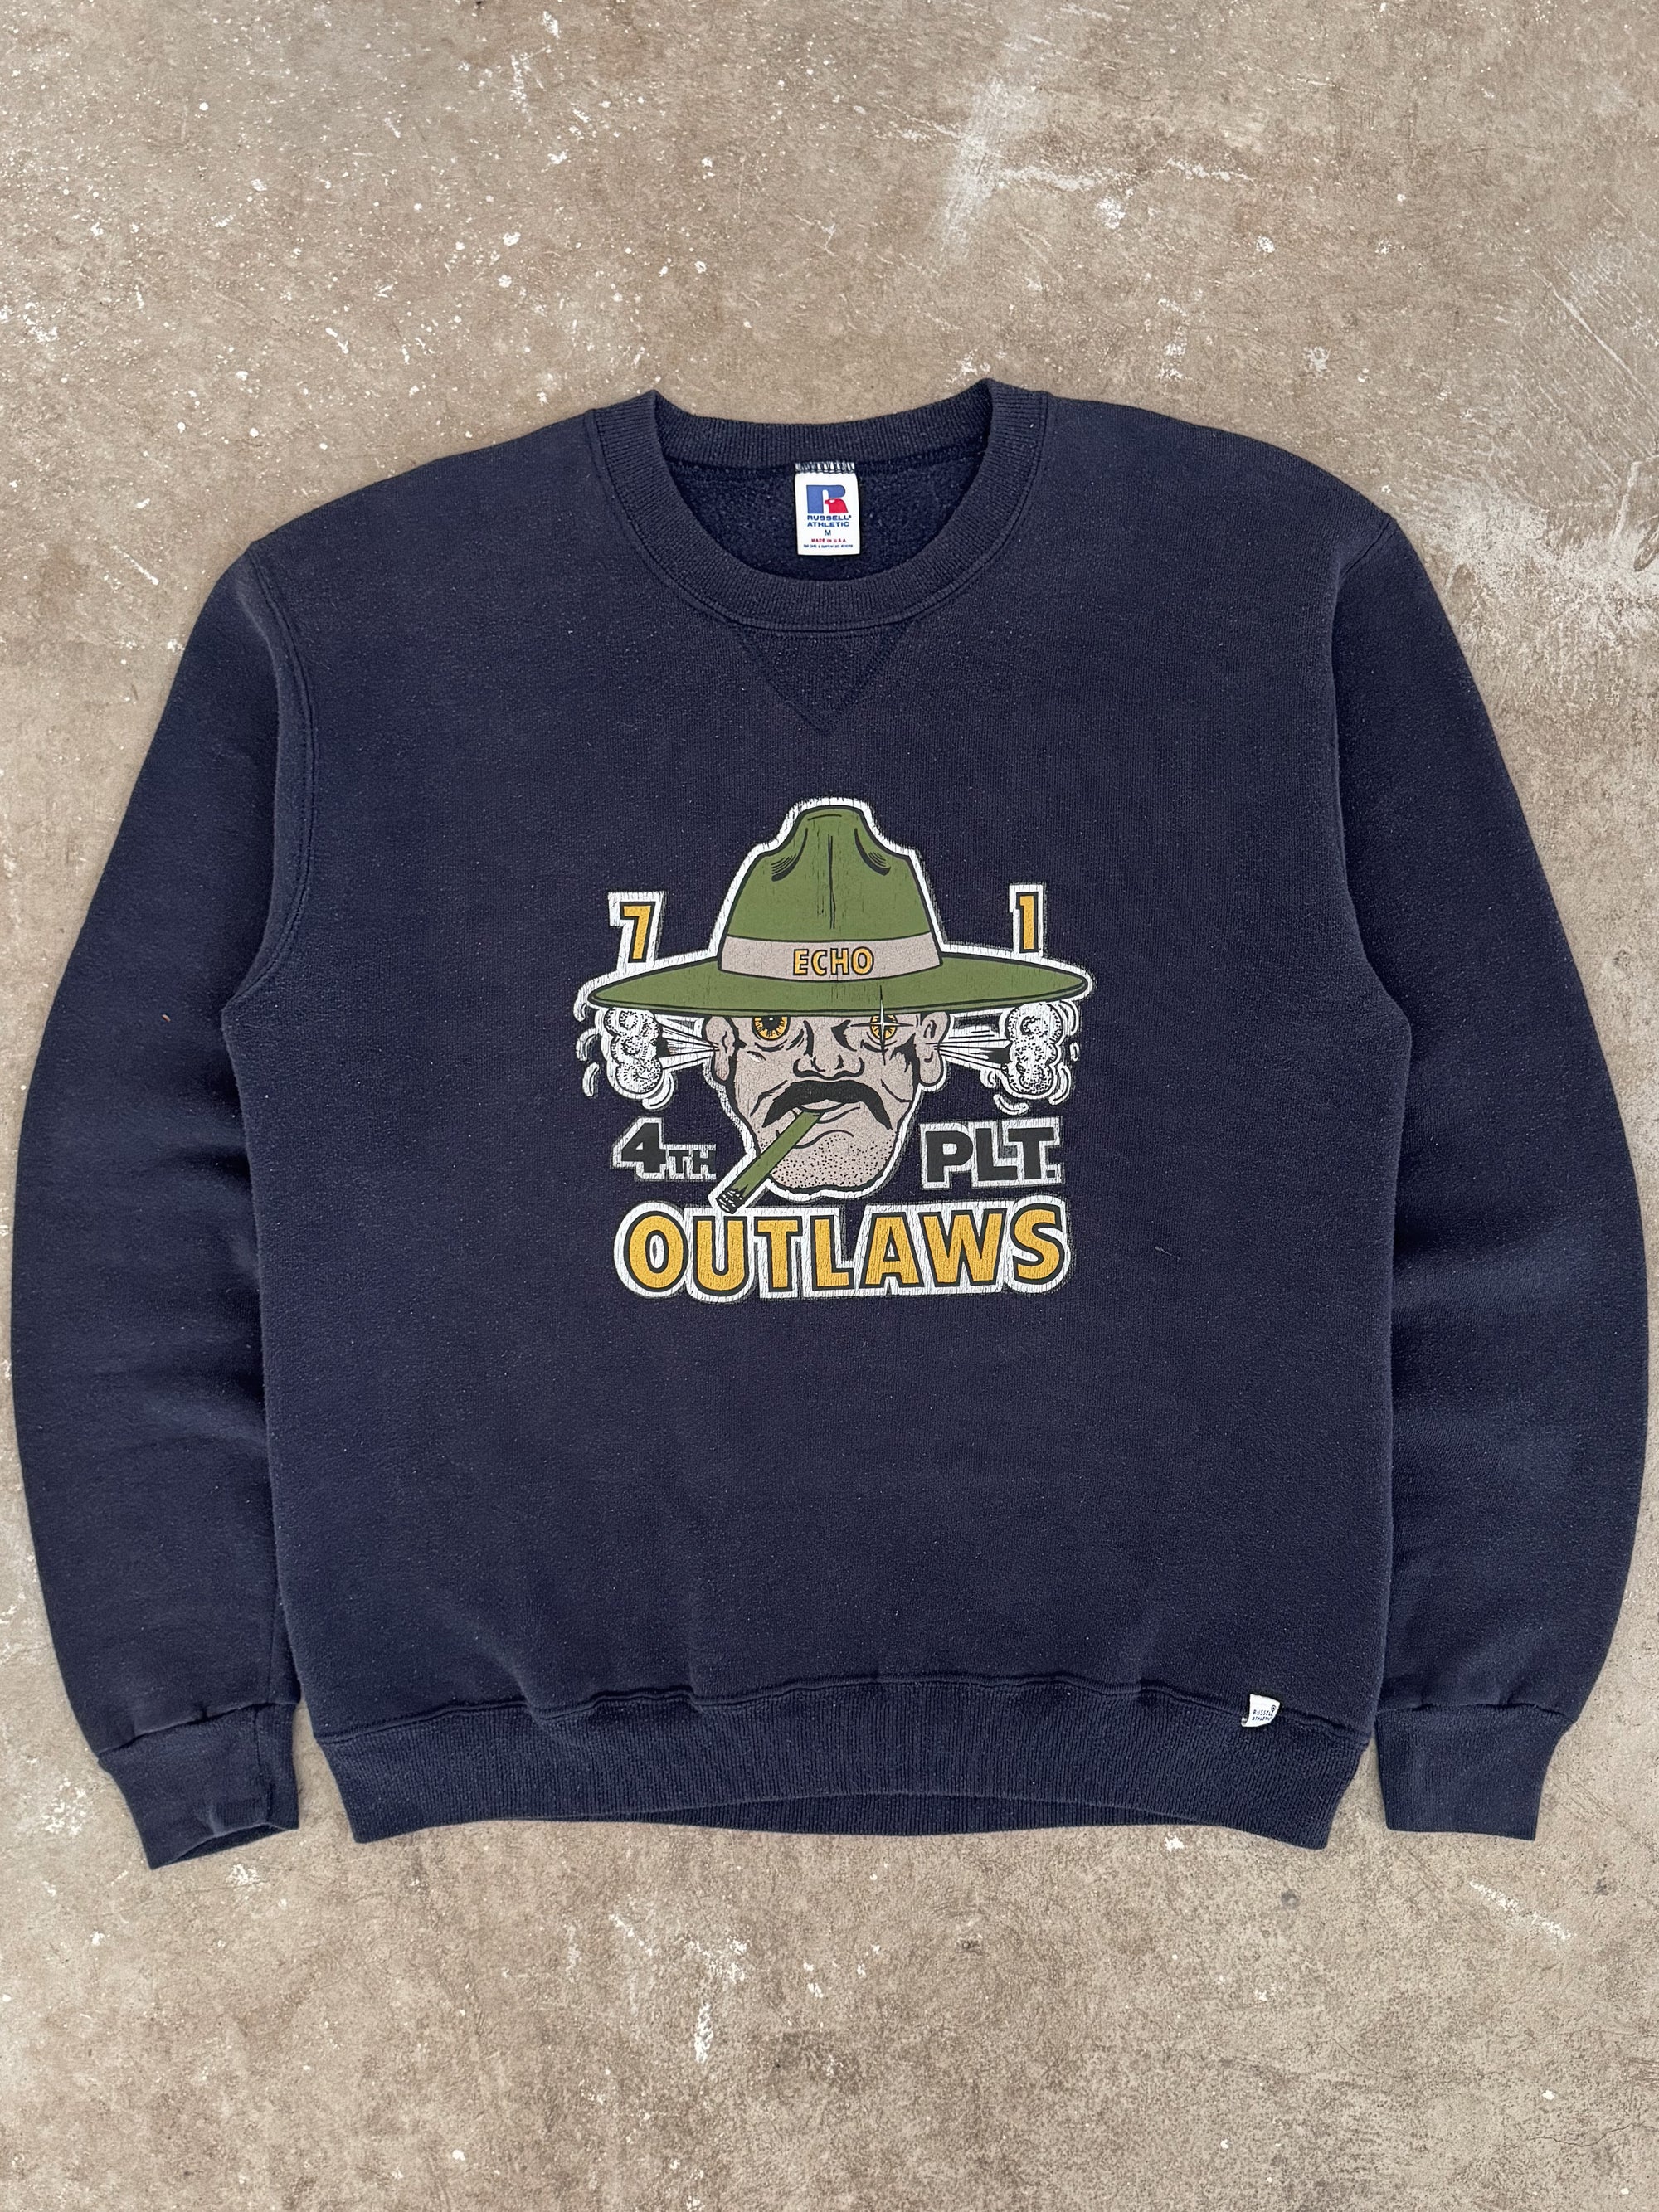 1980s Russell "Outlaws" Sweatshirt (S)